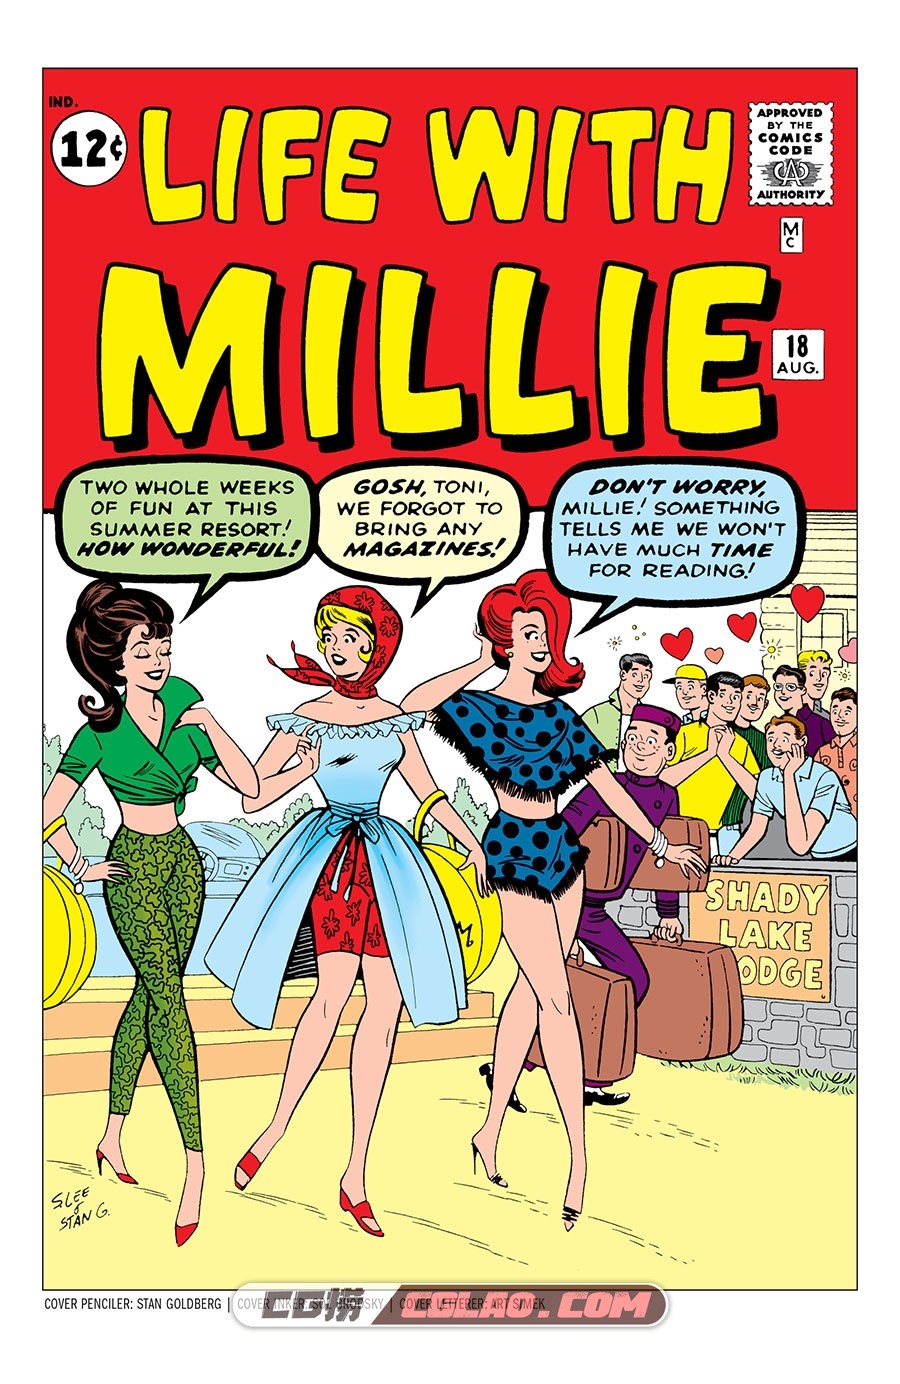 Life With Millie 018 (1962) Digital Shadowcat Empire 漫画 百度网盘下载,Life-With-Millie-018-000.jpg